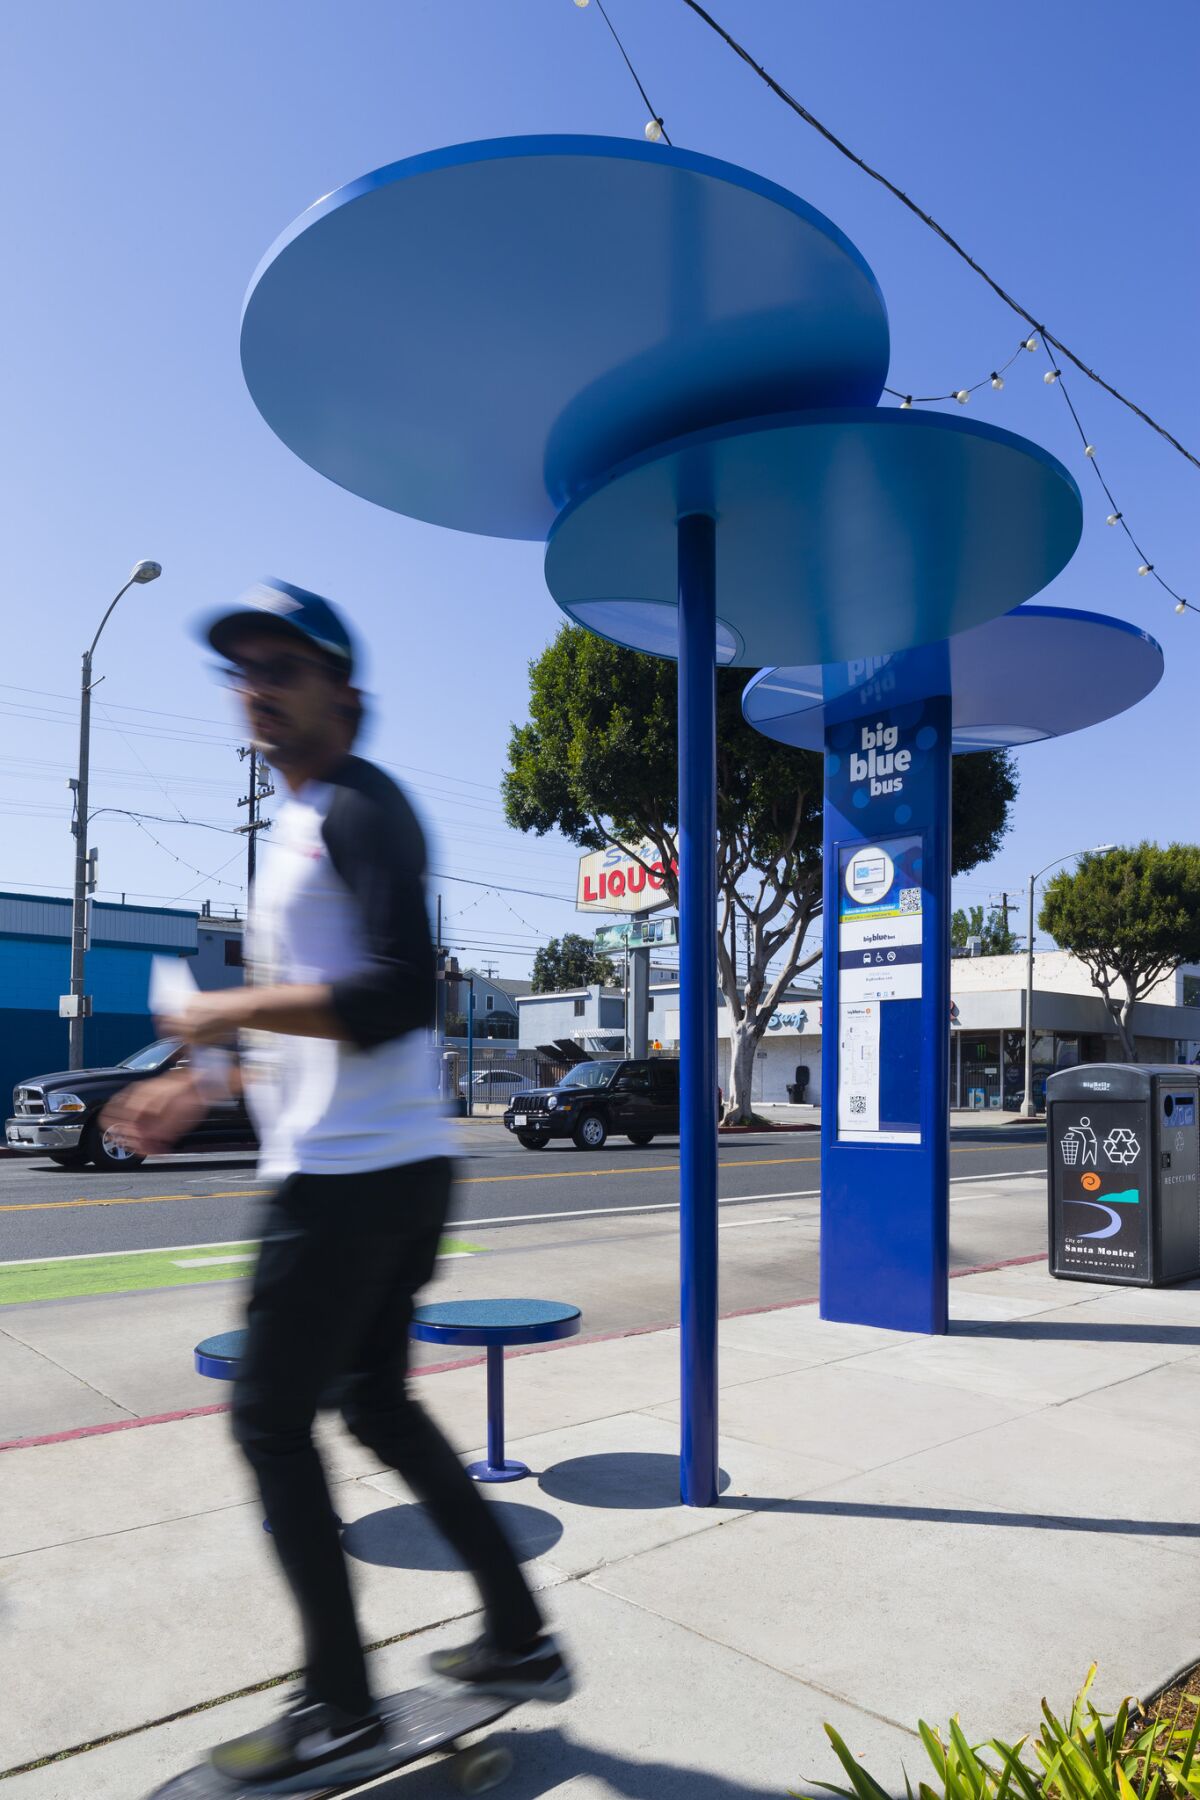 LOHA's design for the Big Blue Bus in Santa Monica in 2016 consists of shelters that can be sized according to need.